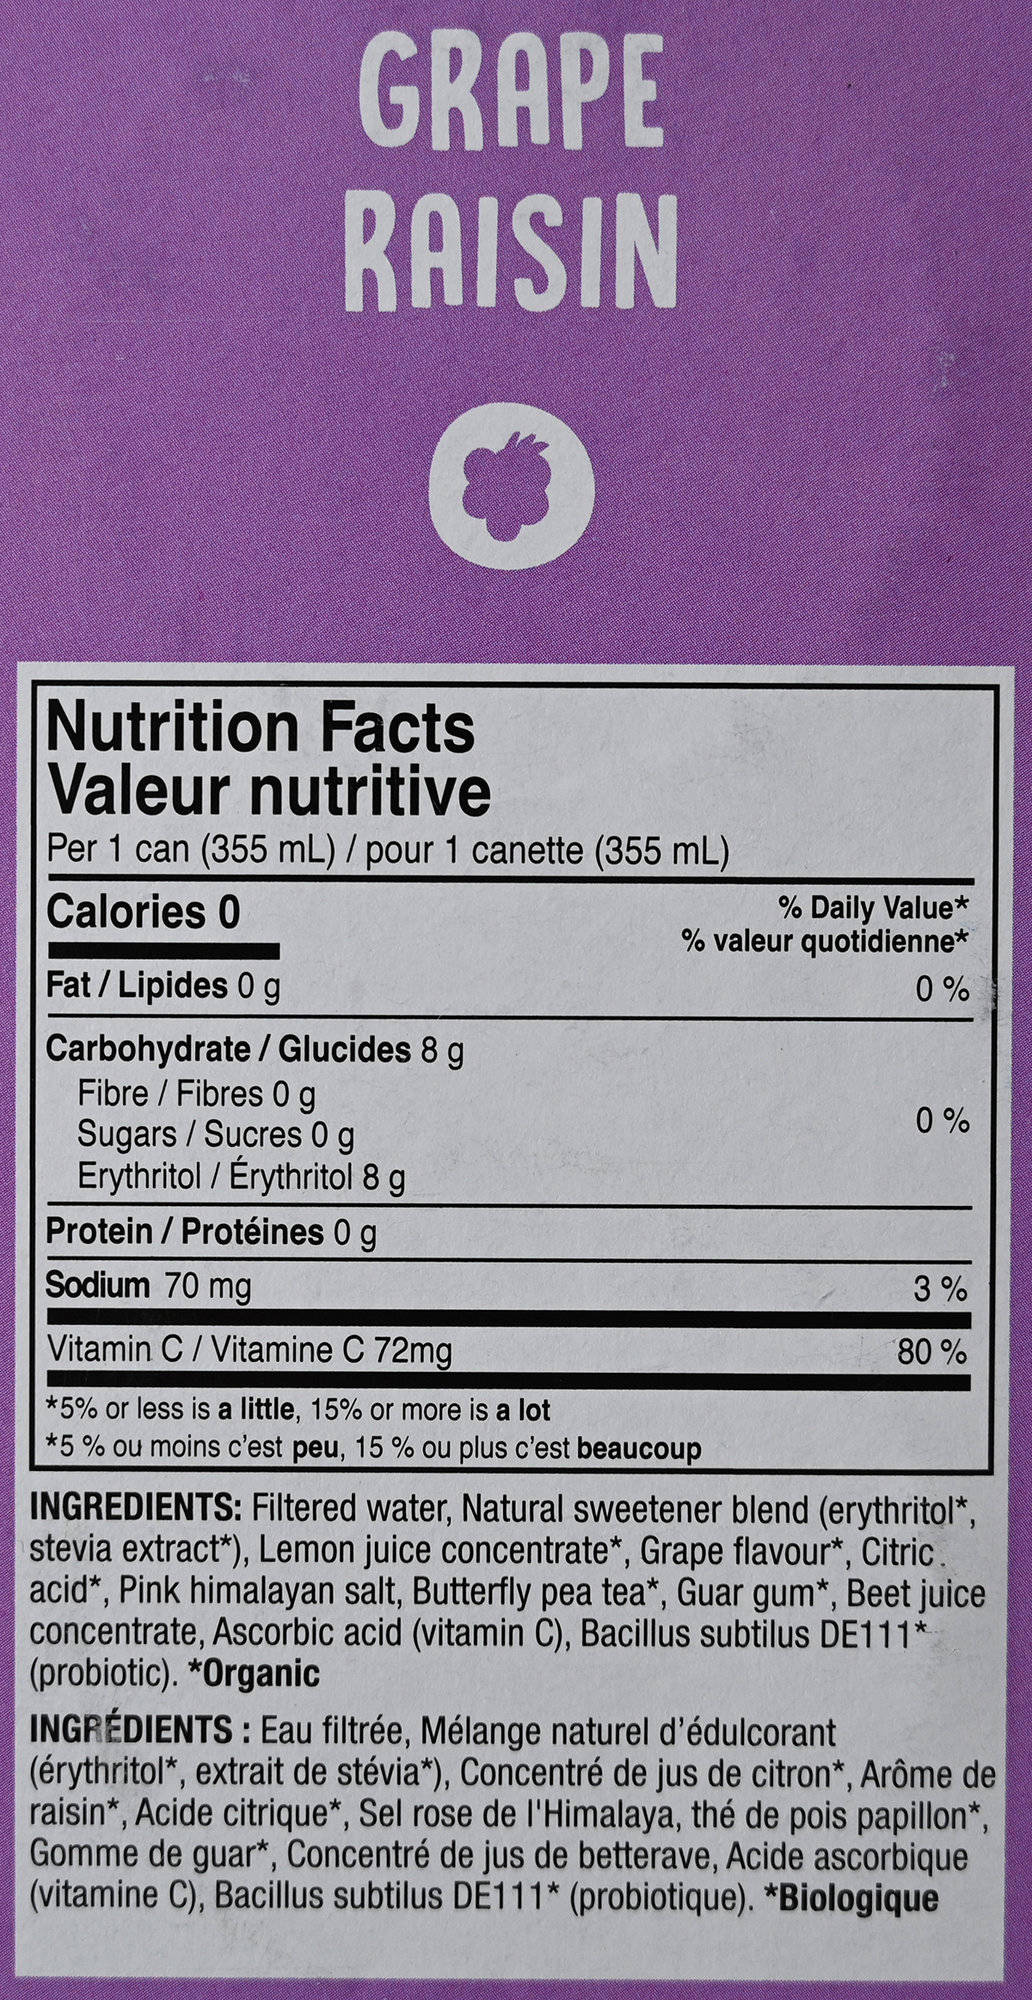 Image of the grape Cove soda nutrition facts from the back of the box.